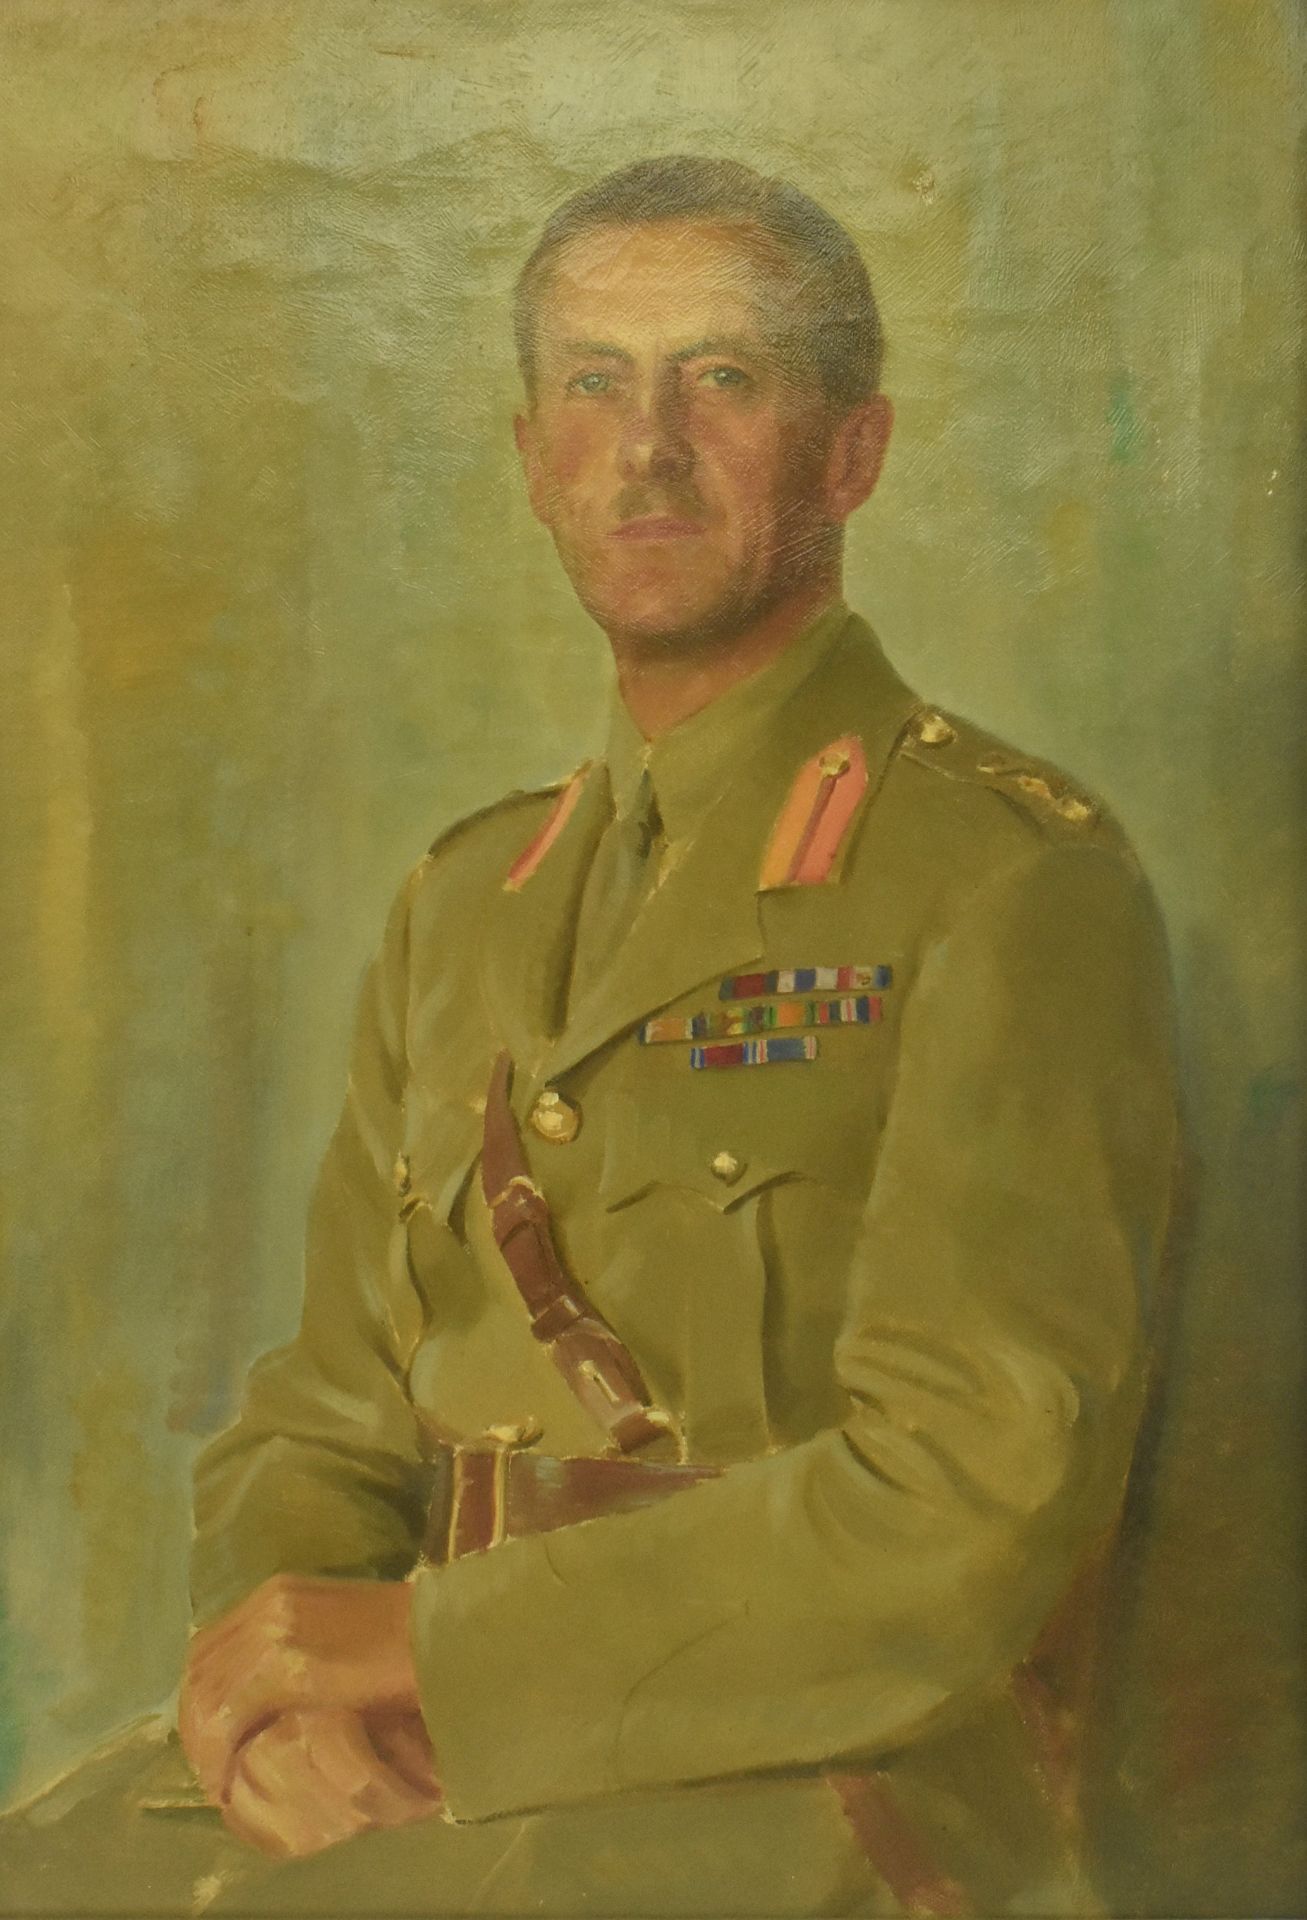 MID 20TH CENTURY PORTRAIT OF UNNAMED WW1 & WW2 SOLDIER